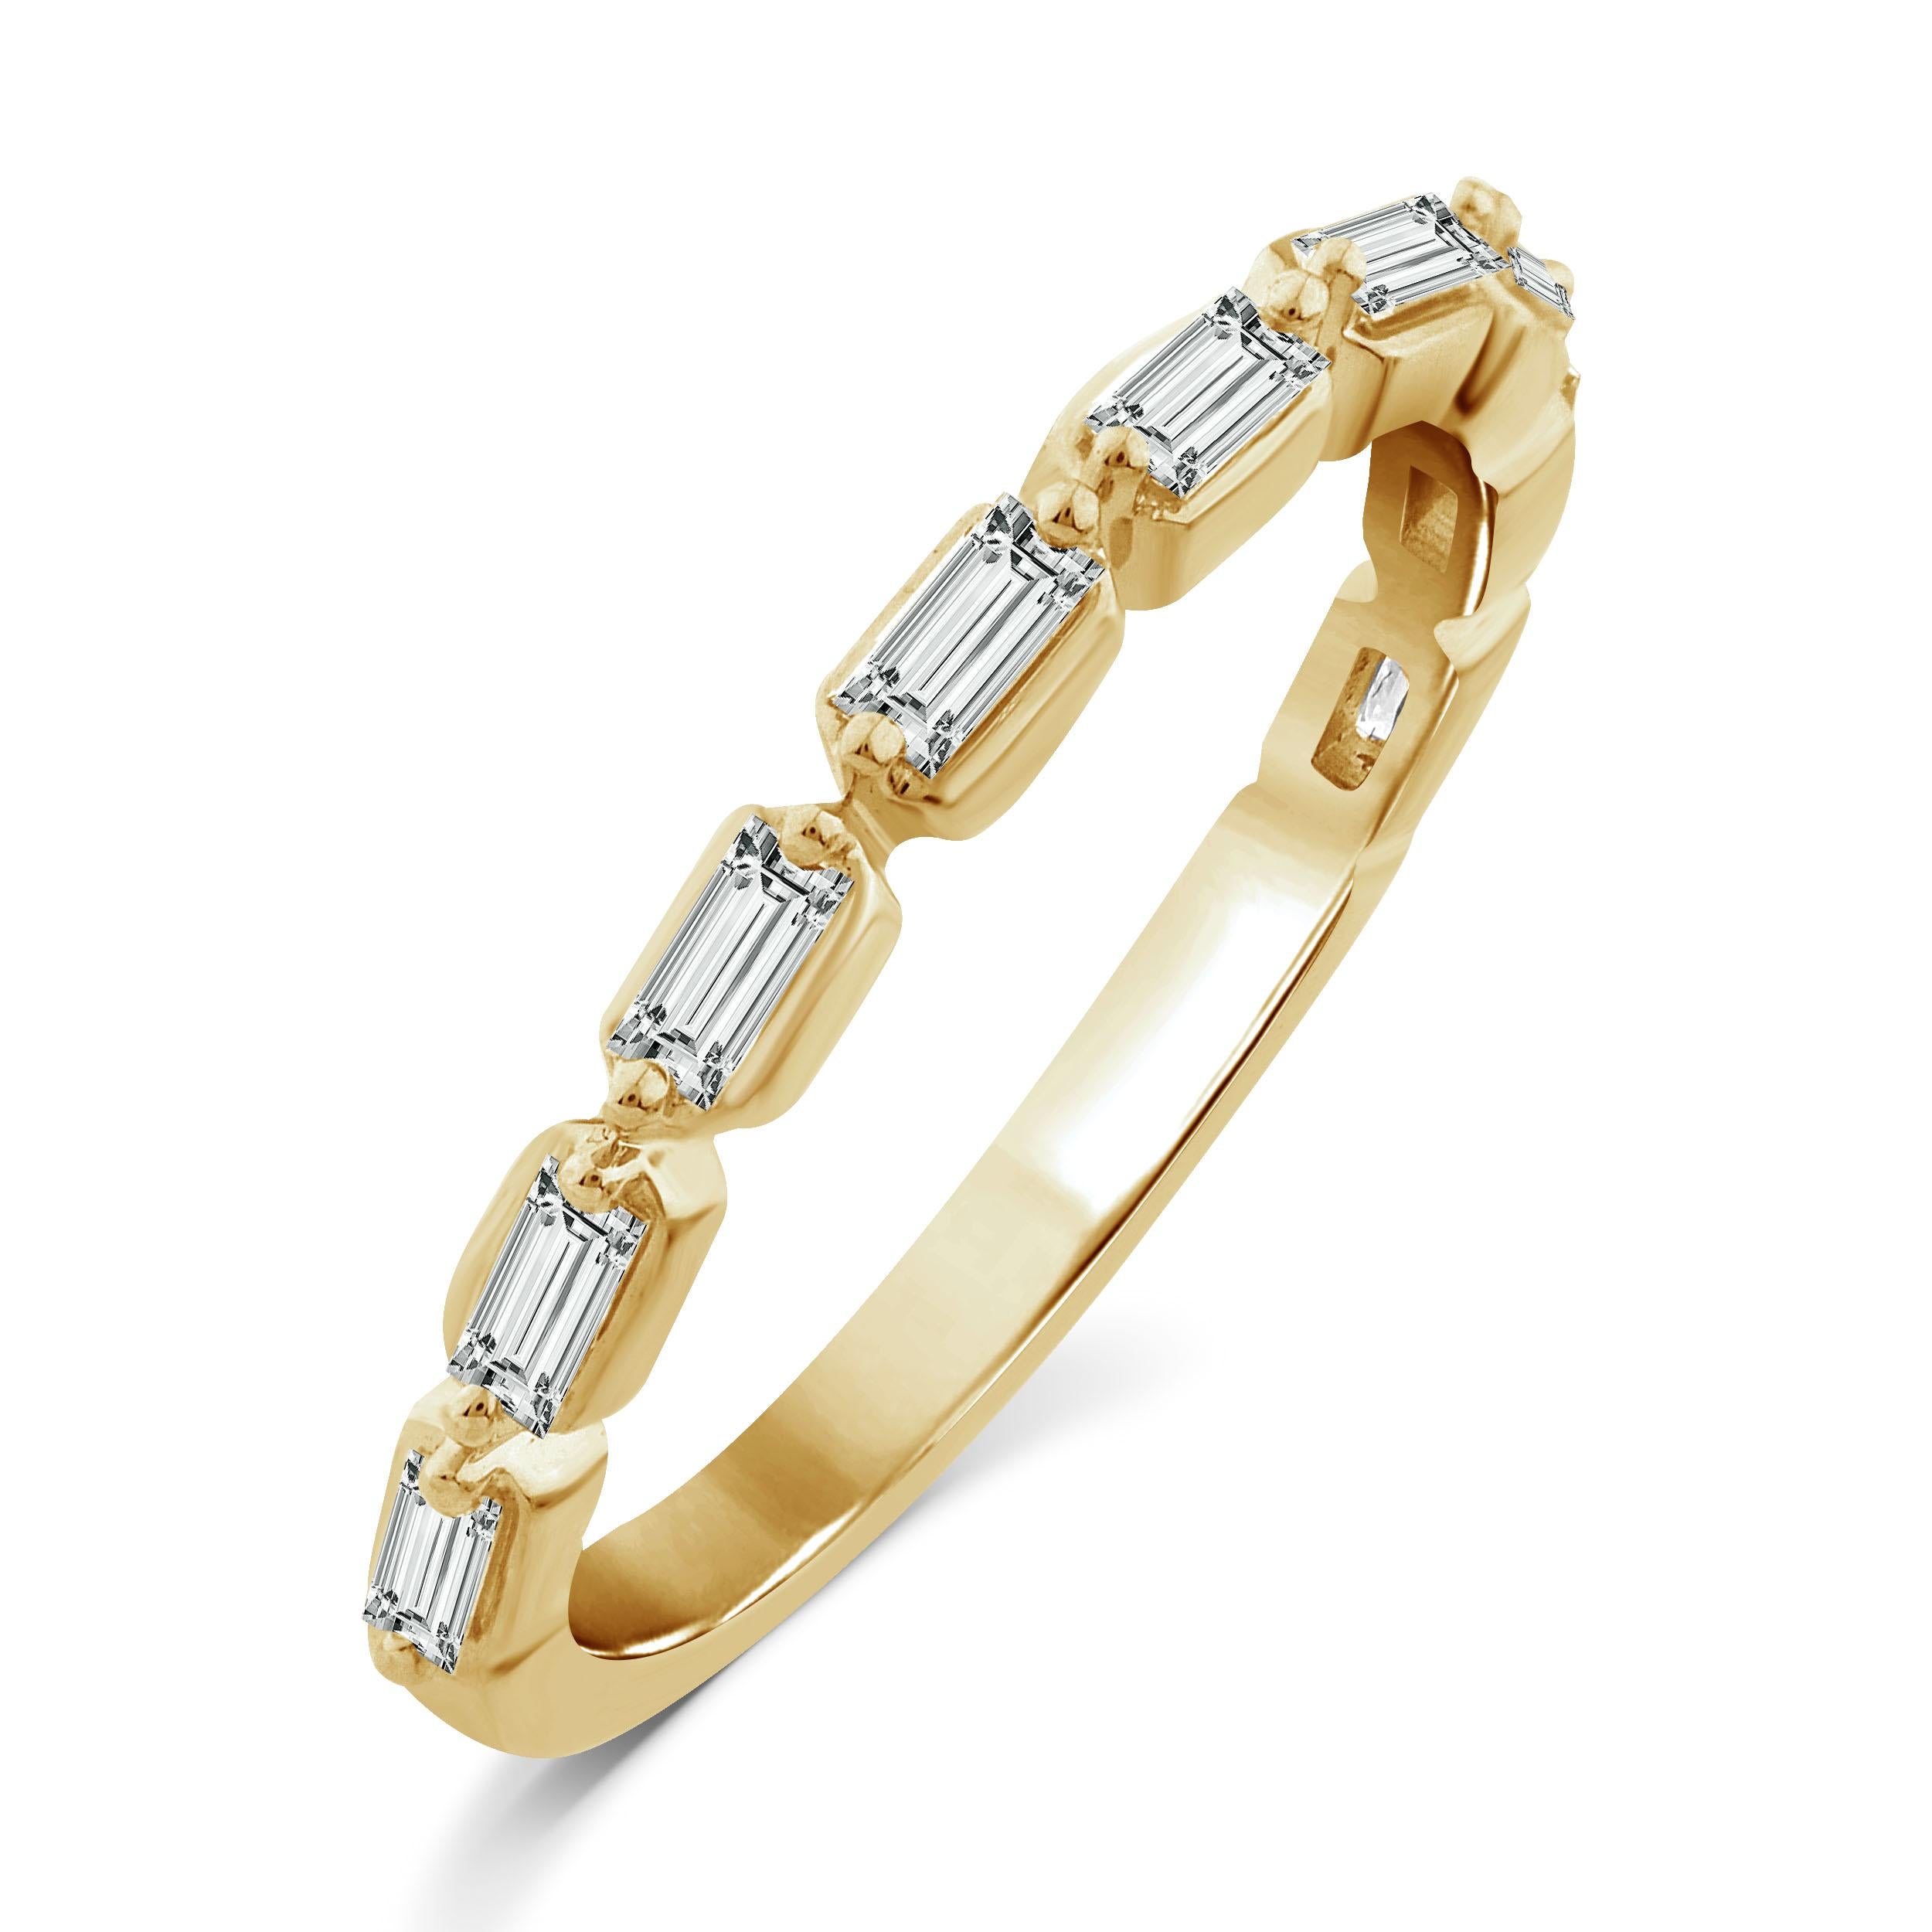 The Floating Baguette Diamond Band Ring is our take on classic diamond engagement bands with a modern twist. This semi eternity diamond band ring features horizontal baguettes set with spaces in between to create a floating look. This 14K yellow